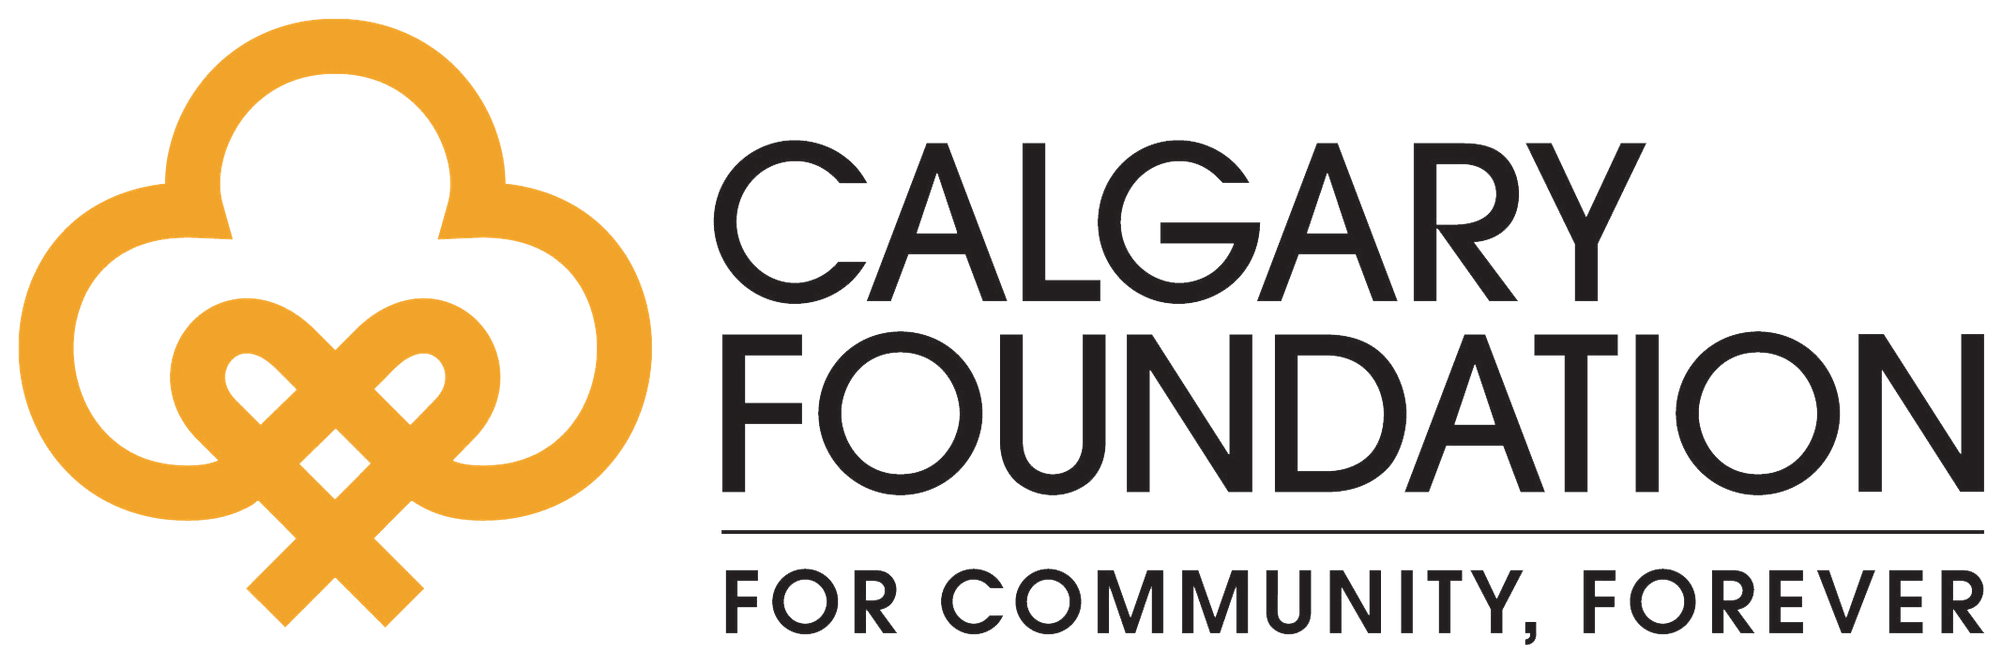 calgary-foundation.png